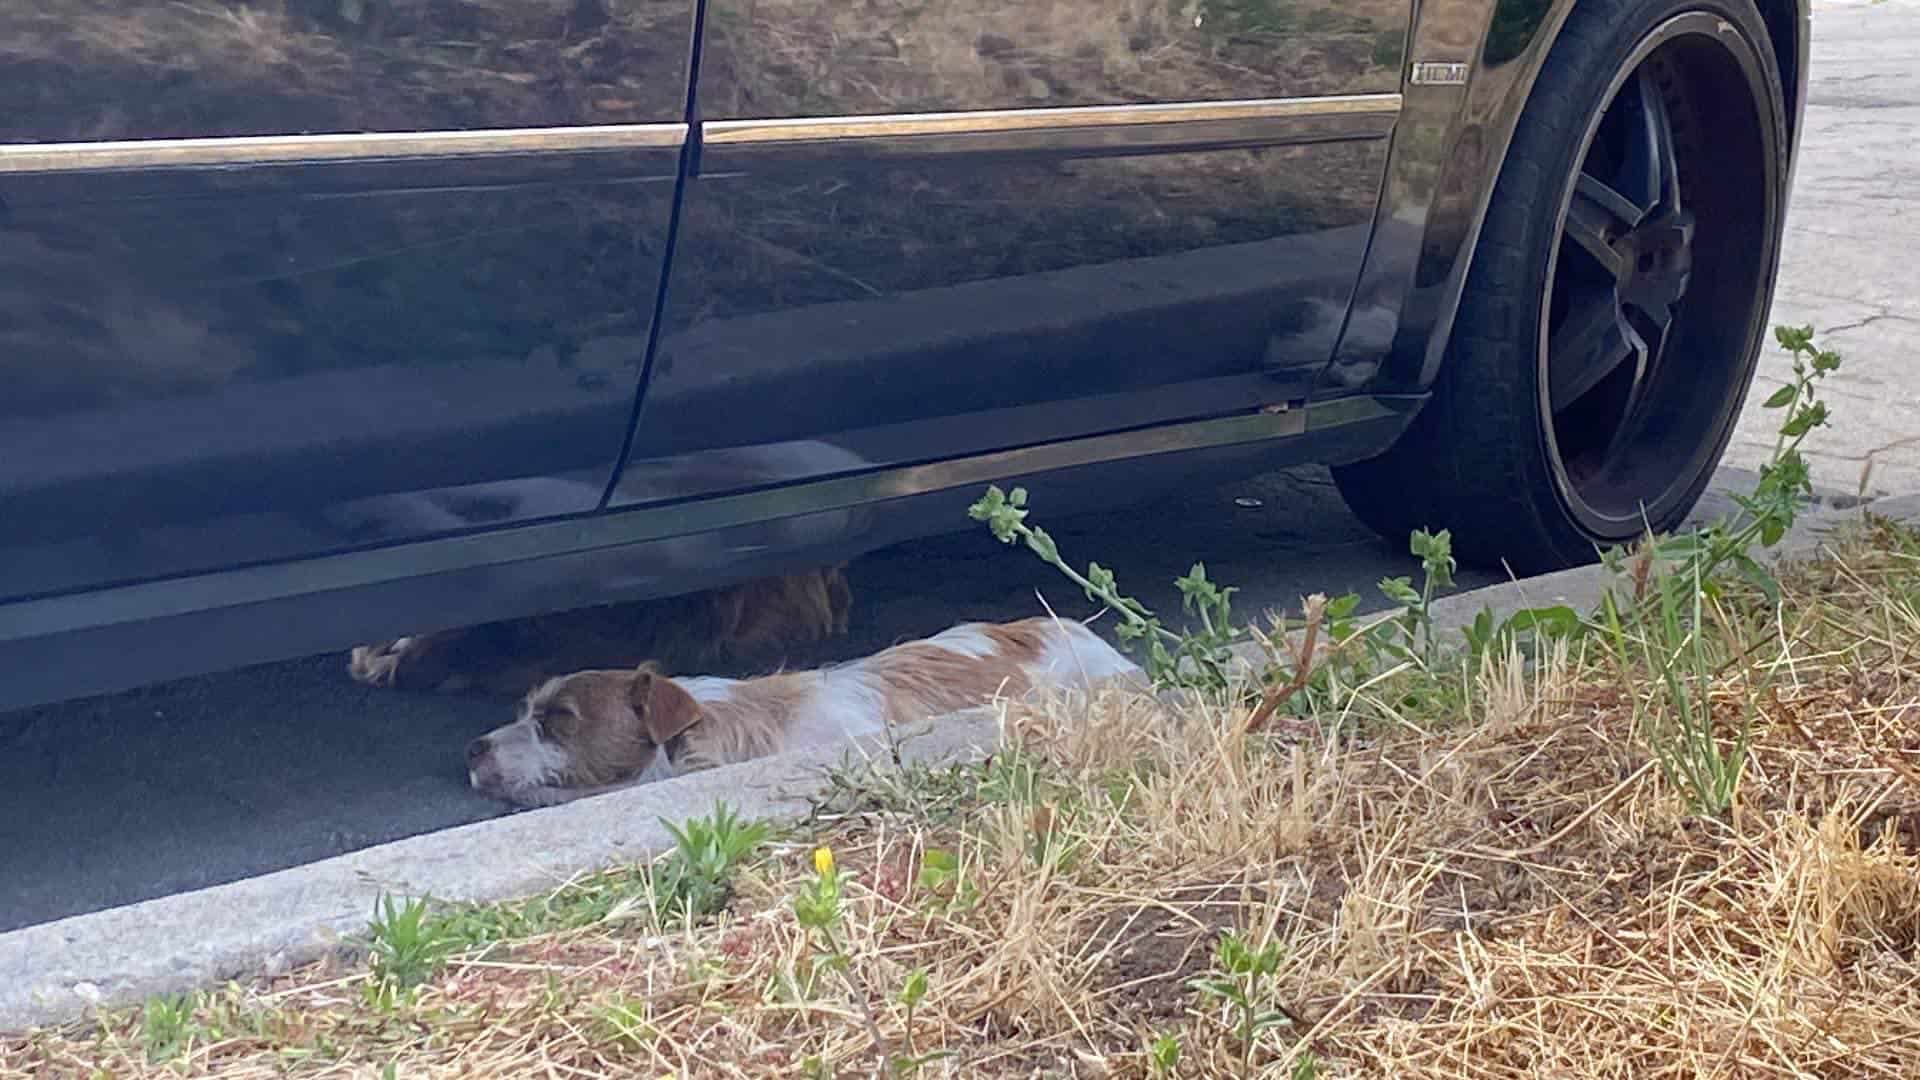 Dogs laying under the car